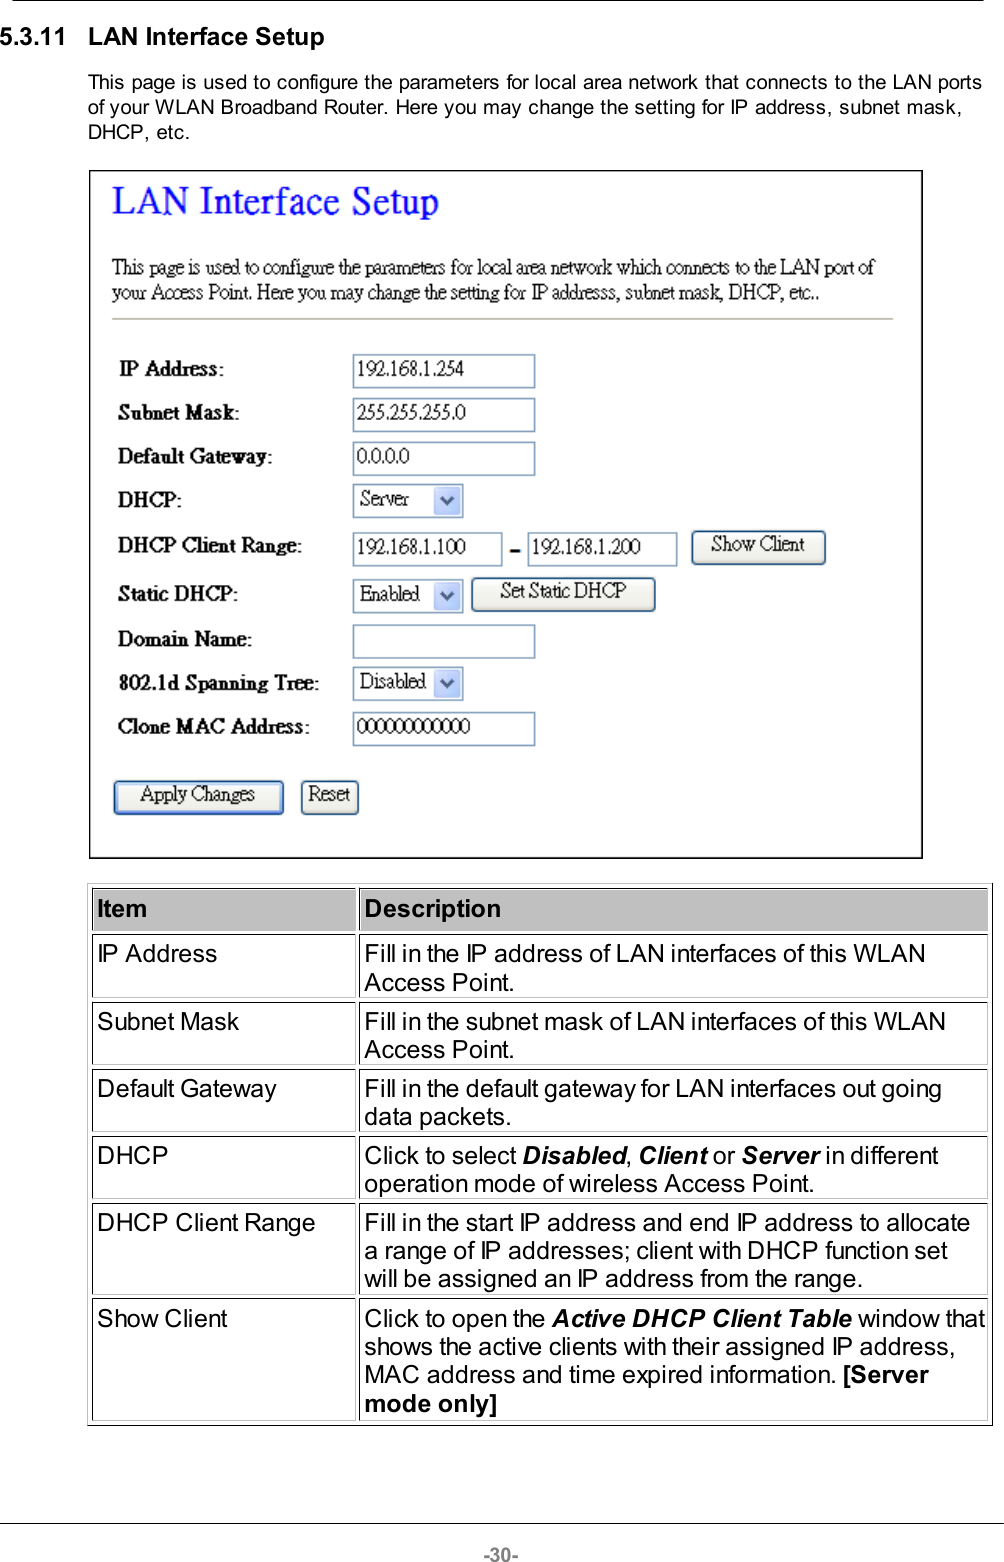 -30-5.3.11 LAN Interface SetupThis page is used to configure the parameters for local area network that connects to the LAN portsof your WLAN Broadband Router. Here you may change the setting for IP address, subnet mask,DHCP, etc.ItemDescriptionIP AddressFill in the IP address of LAN interfaces of this WLANAccess Point. Subnet MaskFill in the subnet mask of LAN interfaces of this WLANAccess Point.Default GatewayFill in the default gateway for LAN interfaces out goingdata packets.DHCPClick to select Disabled, Client or Server in differentoperation mode of wireless Access Point. DHCP Client RangeFill in the start IP address and end IP address to allocatea range of IP addresses; client with DHCP function setwill be assigned an IP address from the range.Show ClientClick to open the Active DHCP Client Table window thatshows the active clients with their assigned IP address,MAC address and time expired information. [Servermode only]